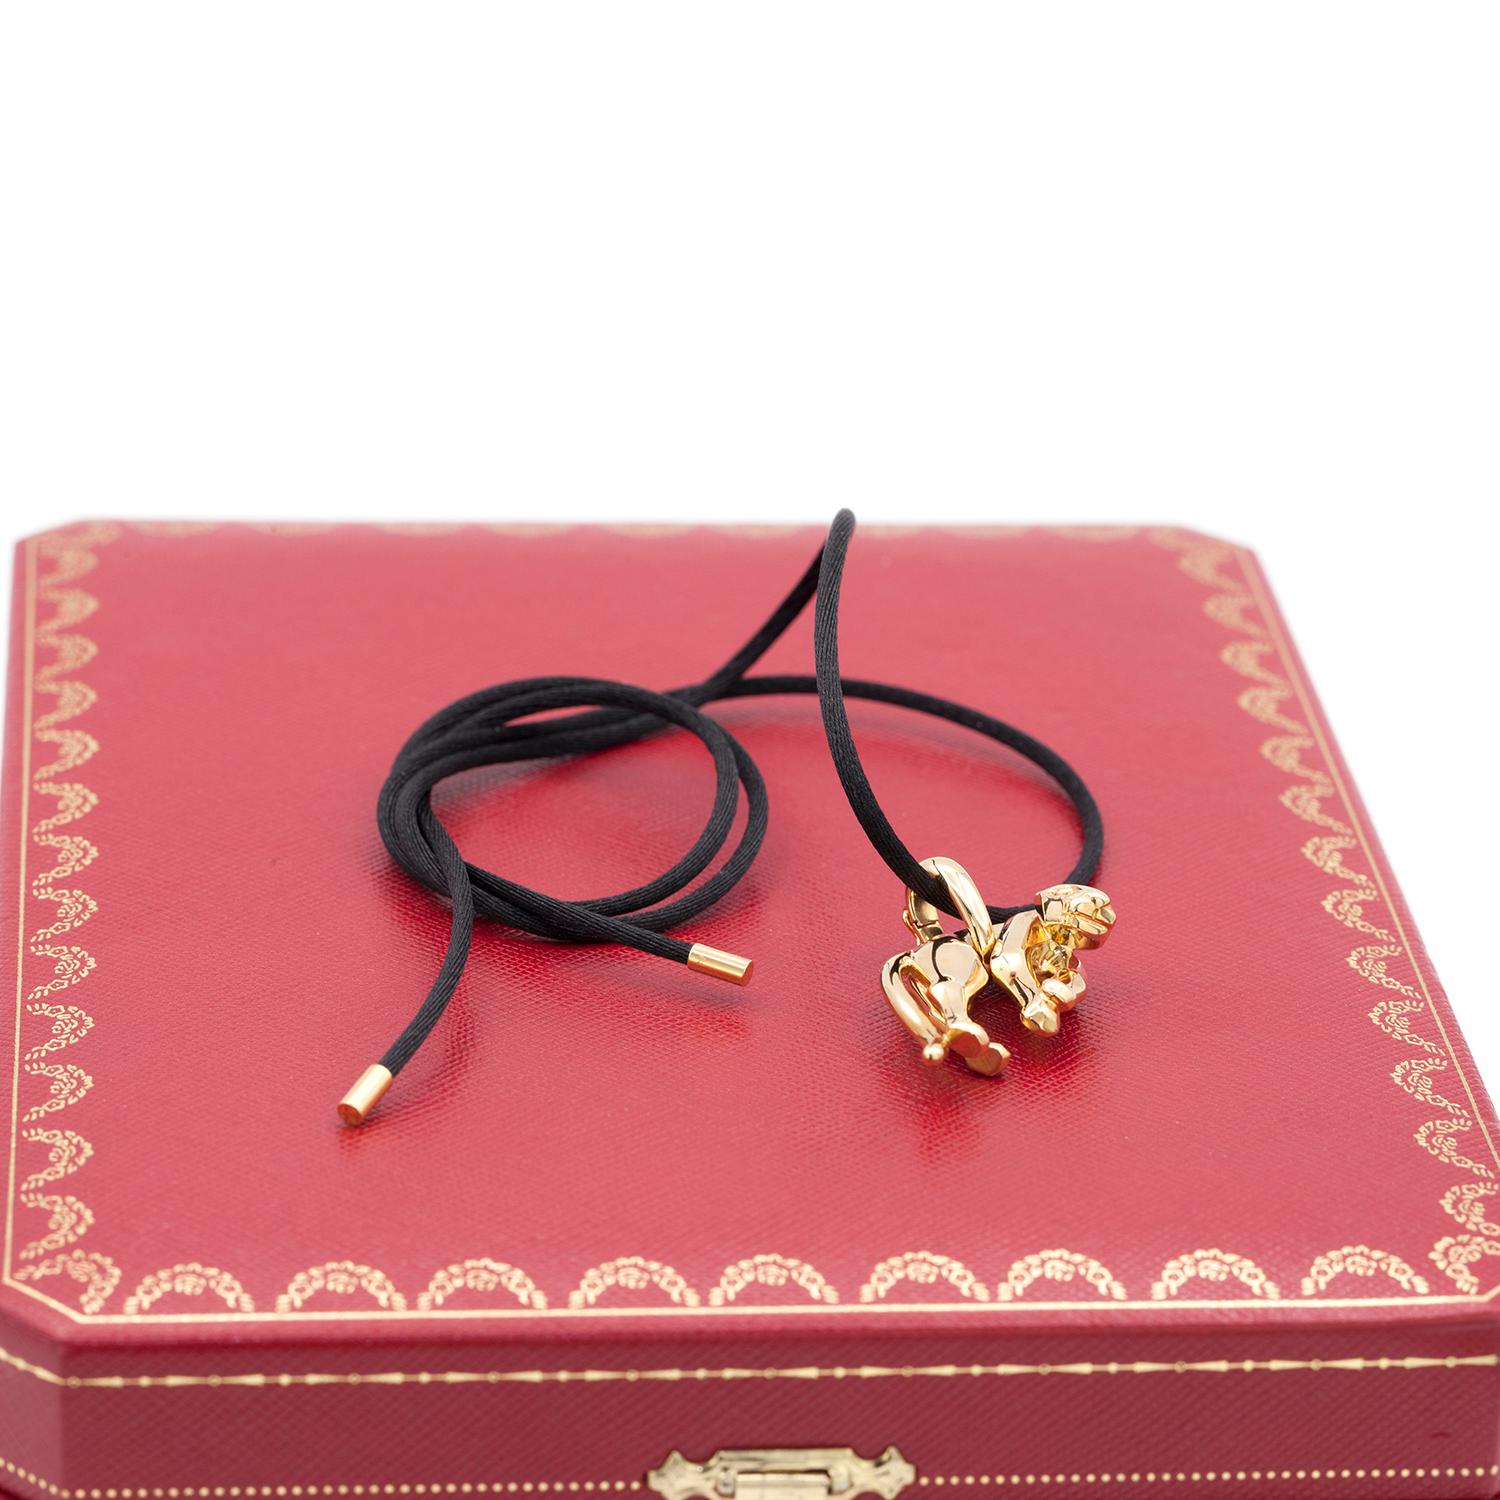 The iconic Cartier Panther necklace
18 karat yellow gold, on a black silk rope.
signed Cartier, dated 1991 and numbered.
with original Cartier box
Every piece will arrive in special packaging. 